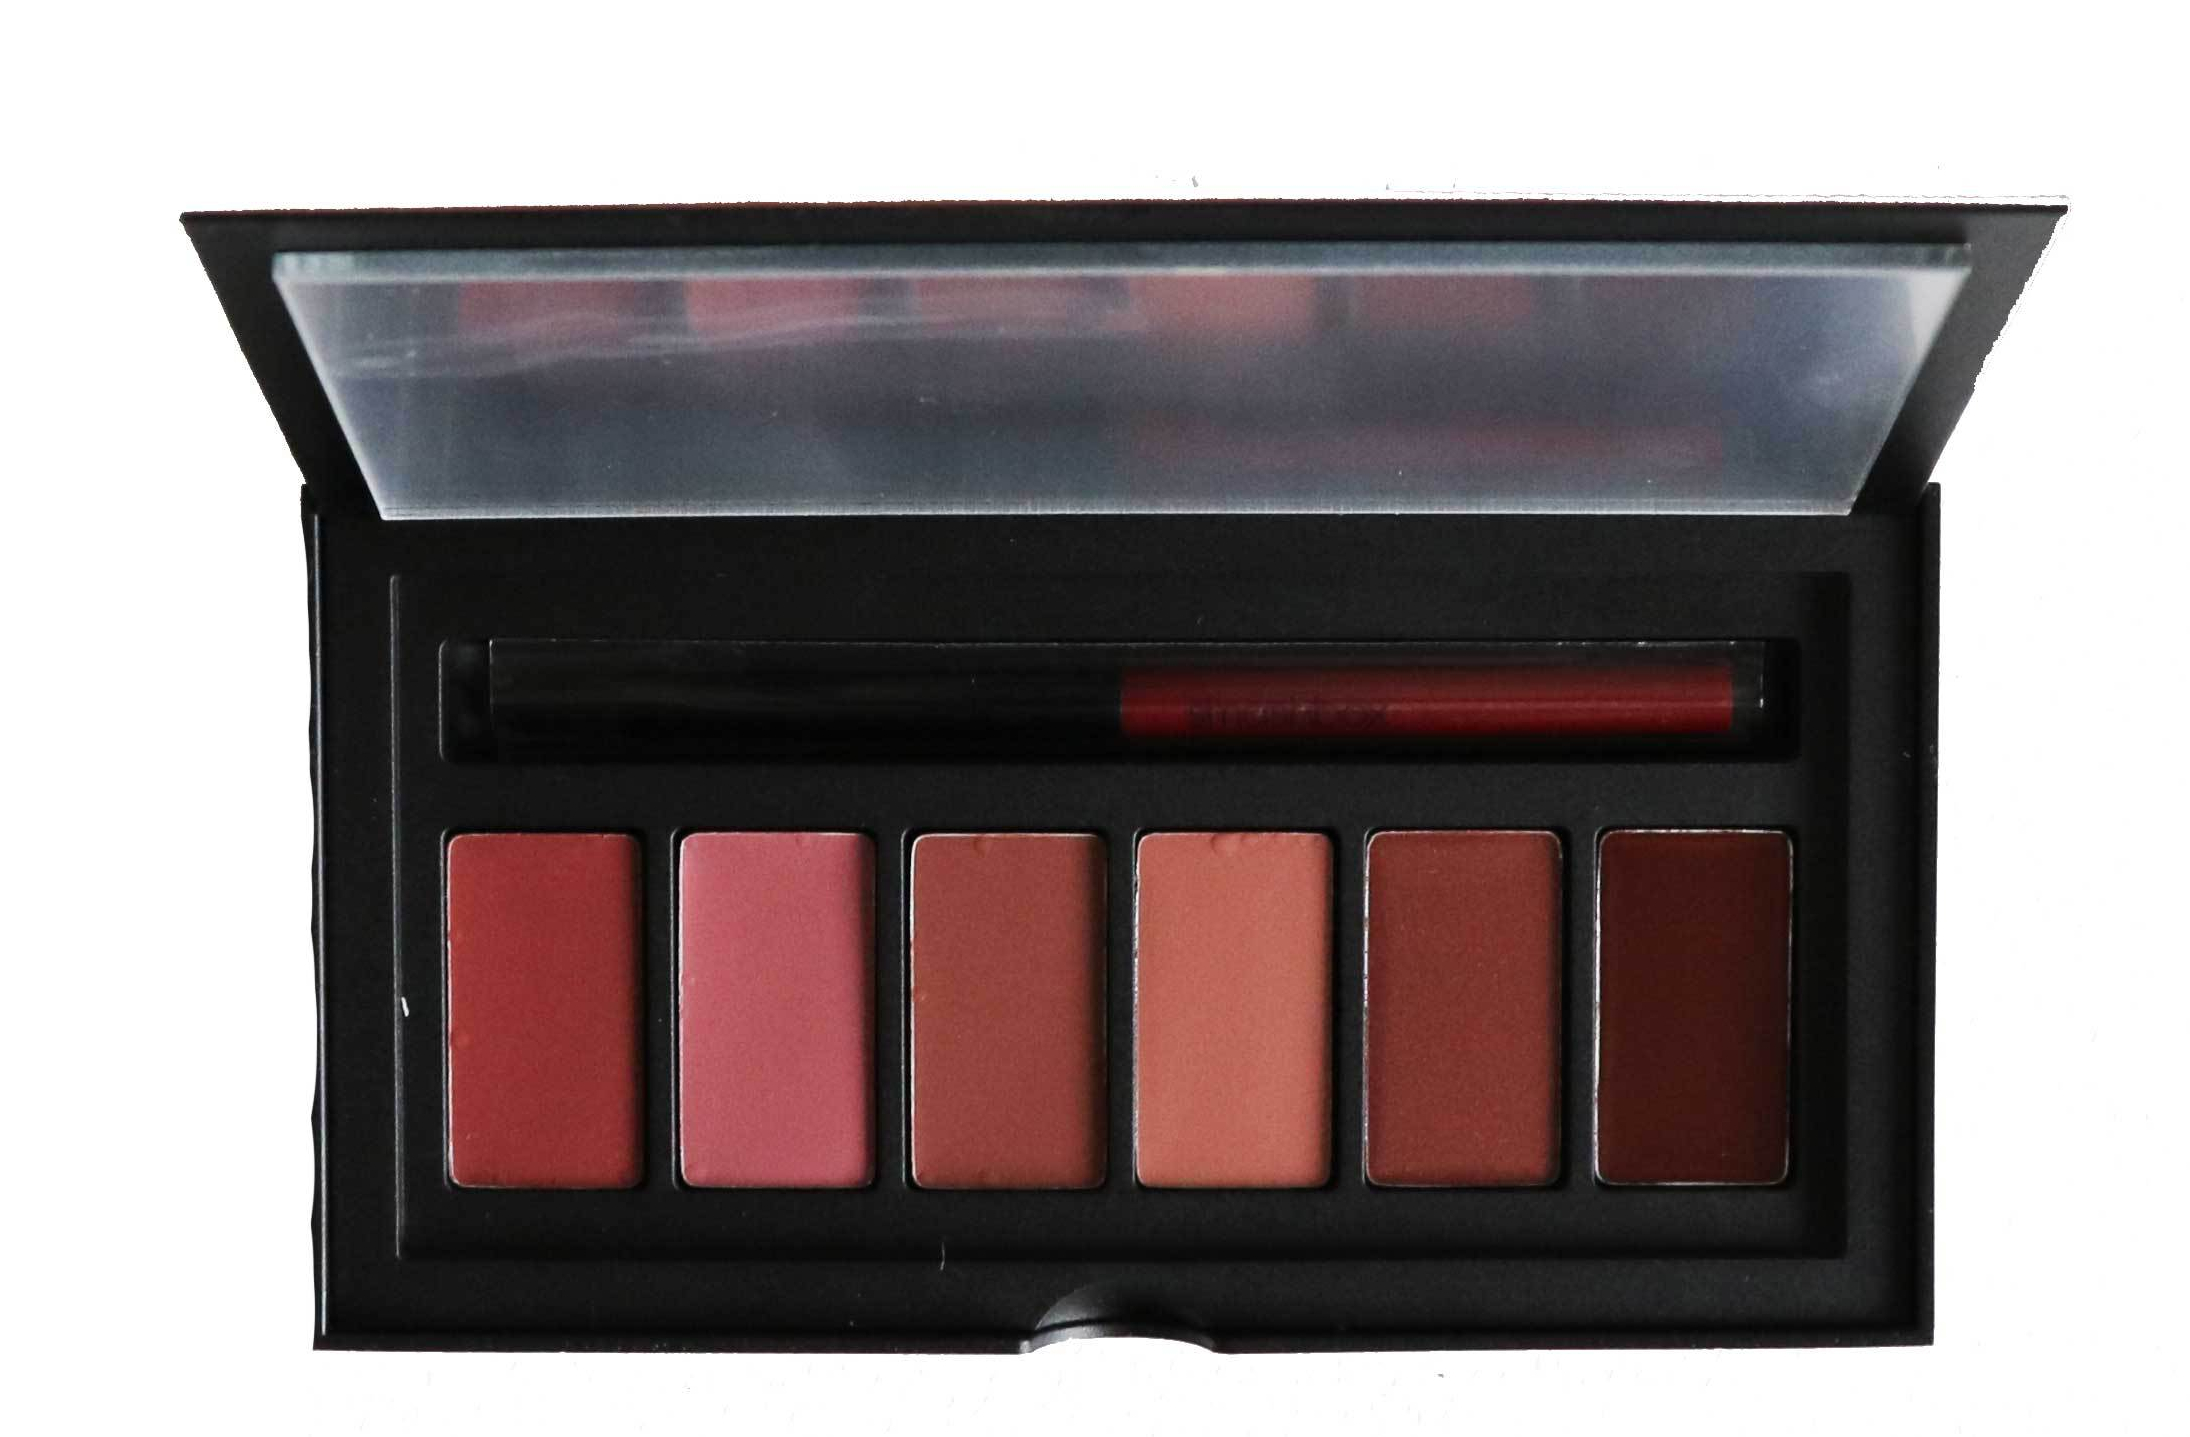 Smashbox Be Legendary Pucker Up Lipstick Palette - Neutral (3 mattes and 3 Creams)